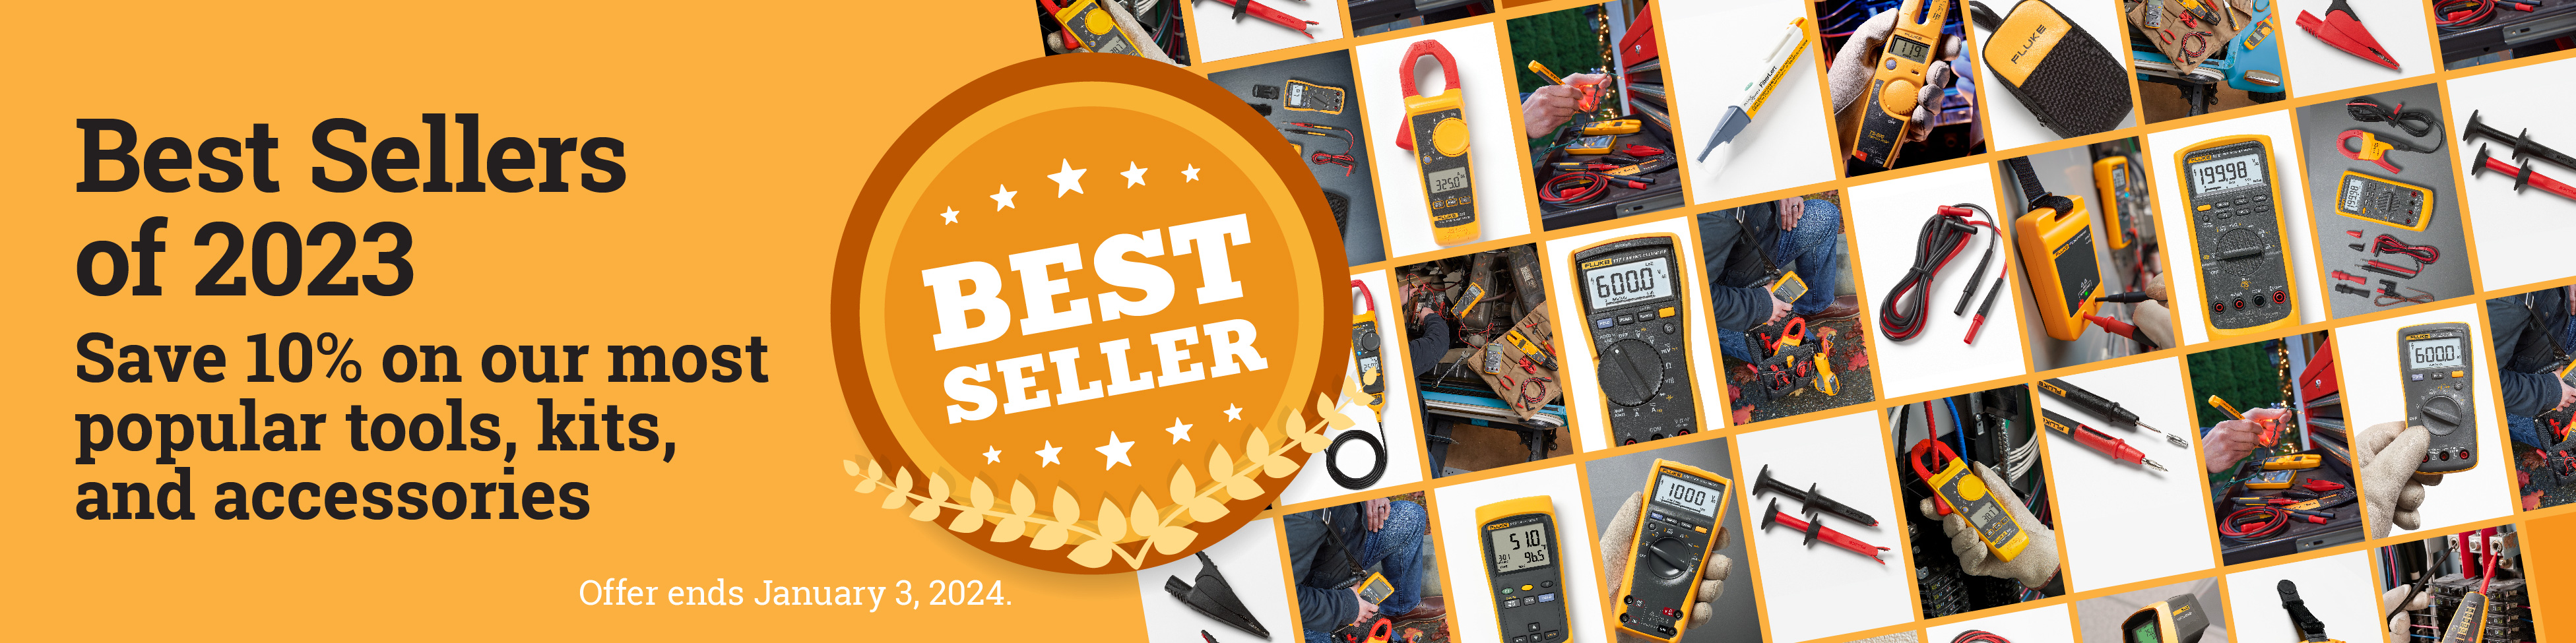 Shop Fluke Products Banner - 2023 Q4H2 eCommerce Promo – Best Sellers of 2023